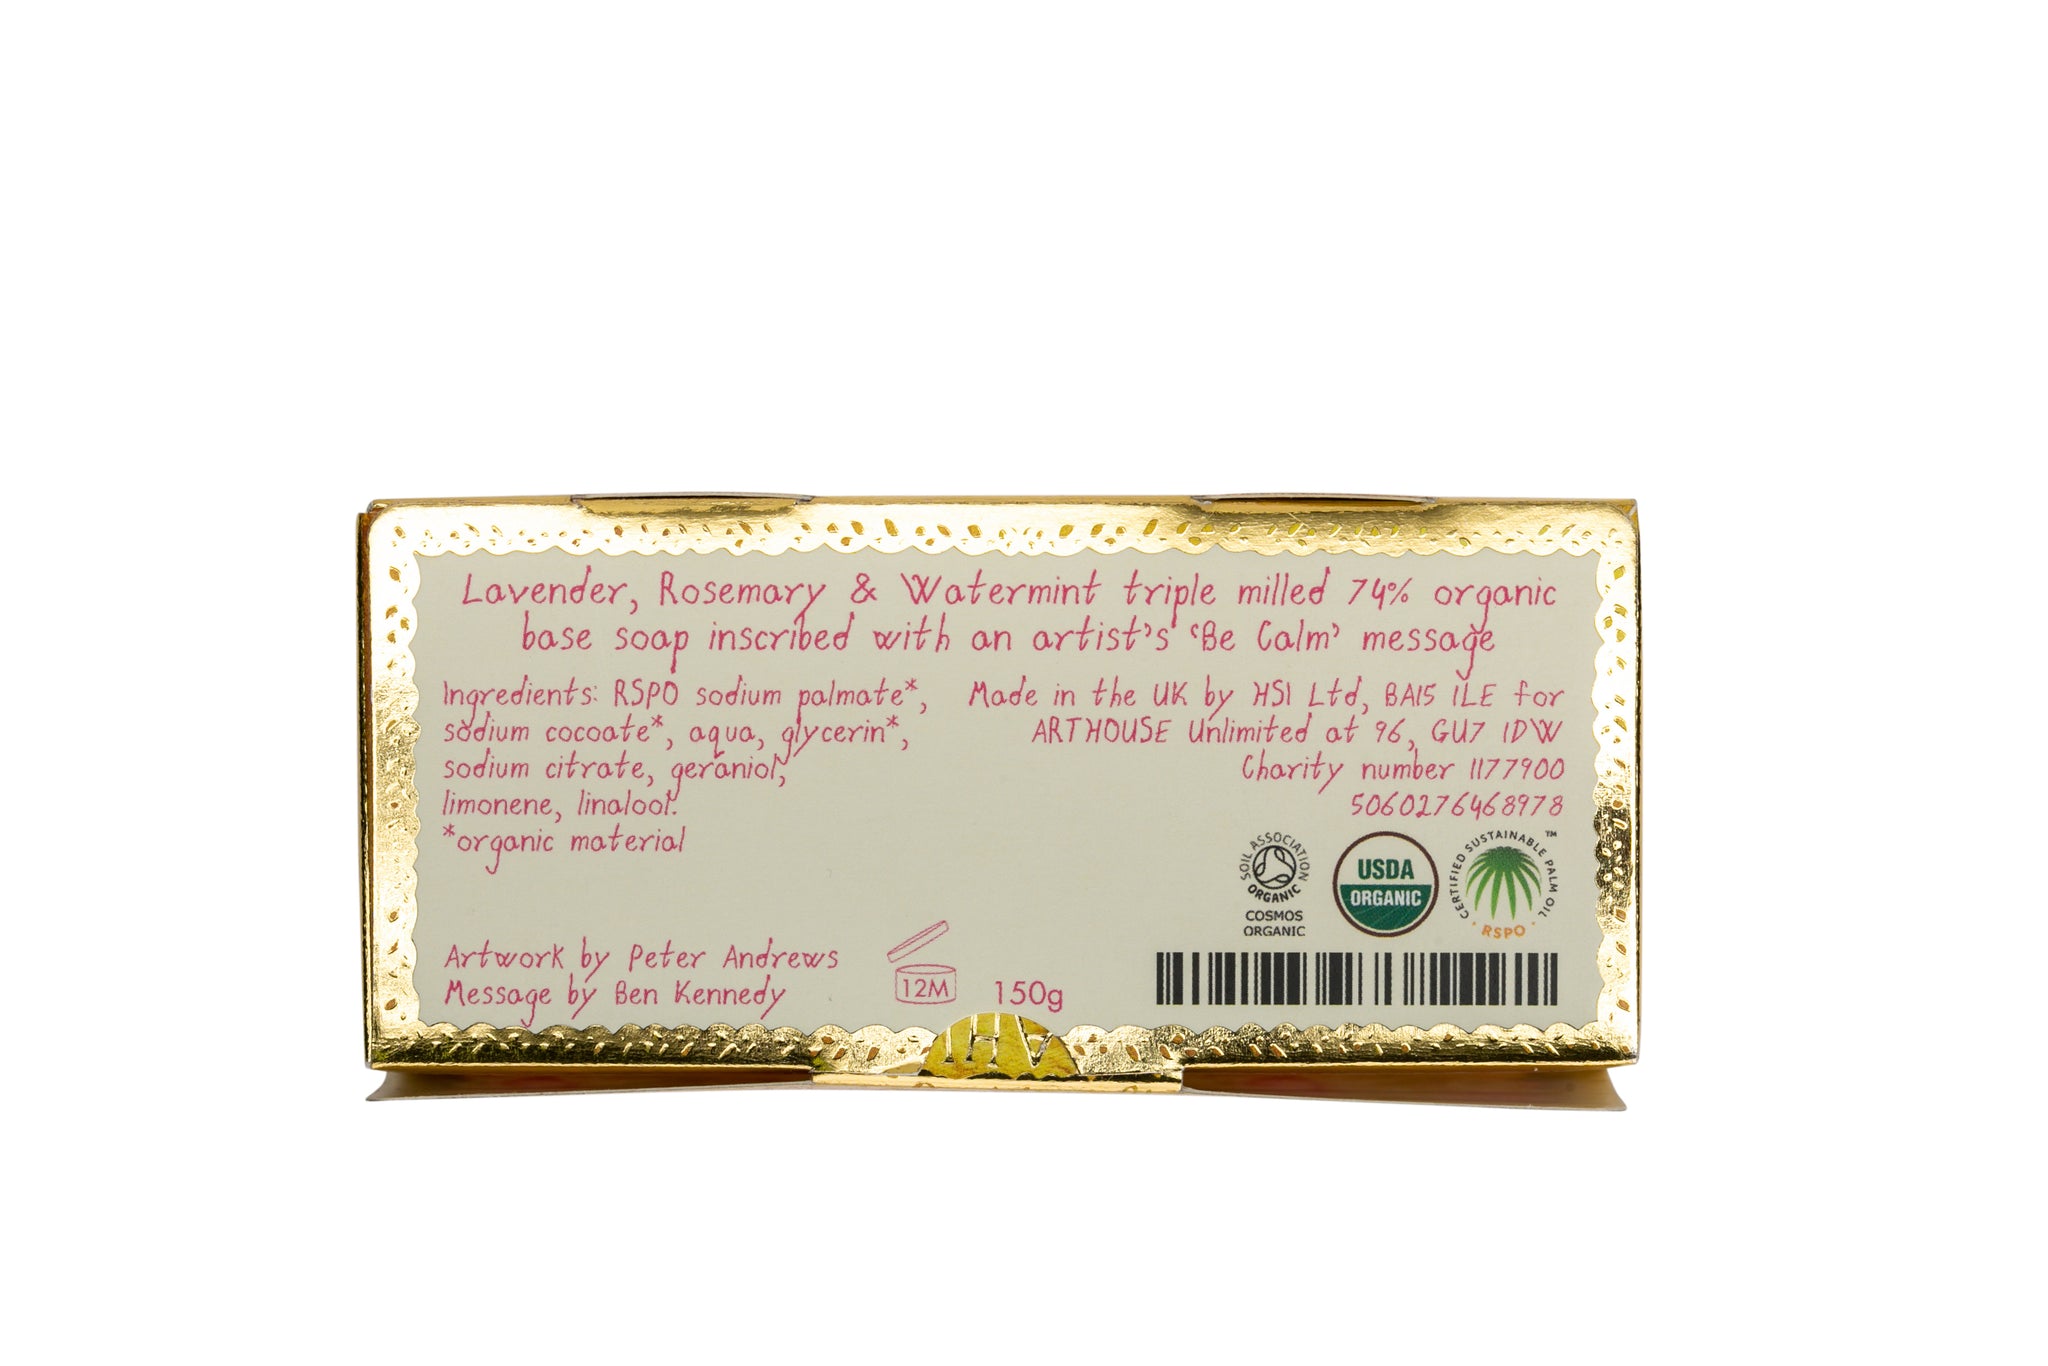 'Be Calm' - Lady Muck Lavender, Rosemary & Watermint Soap